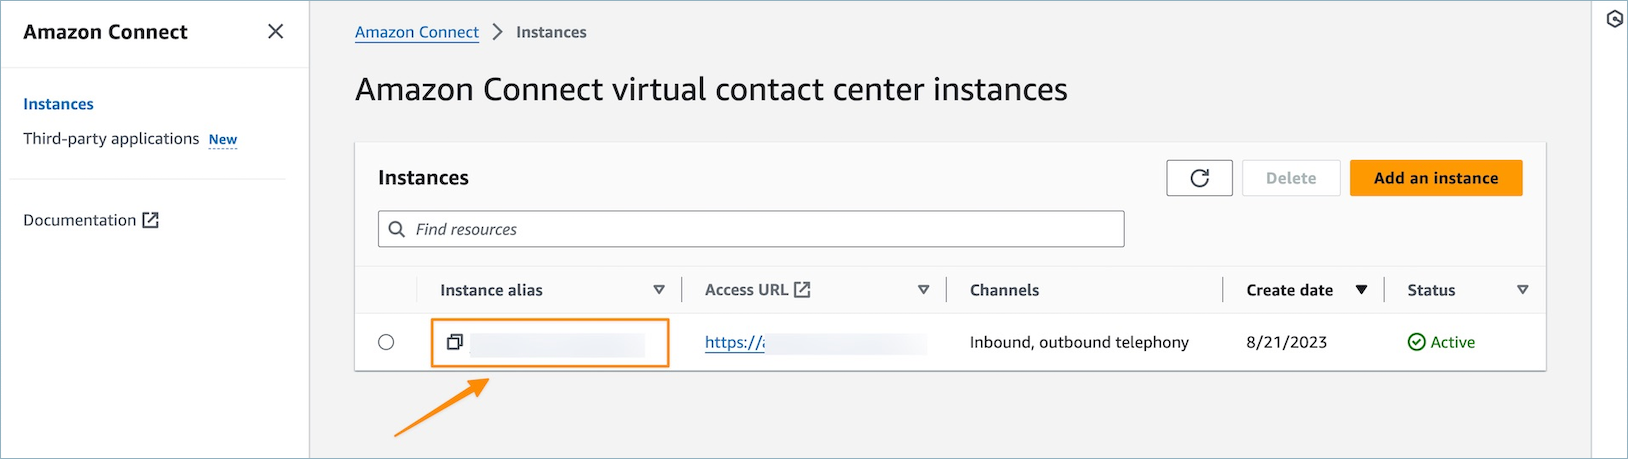 The Amazon Connect virtual contact center instances page.